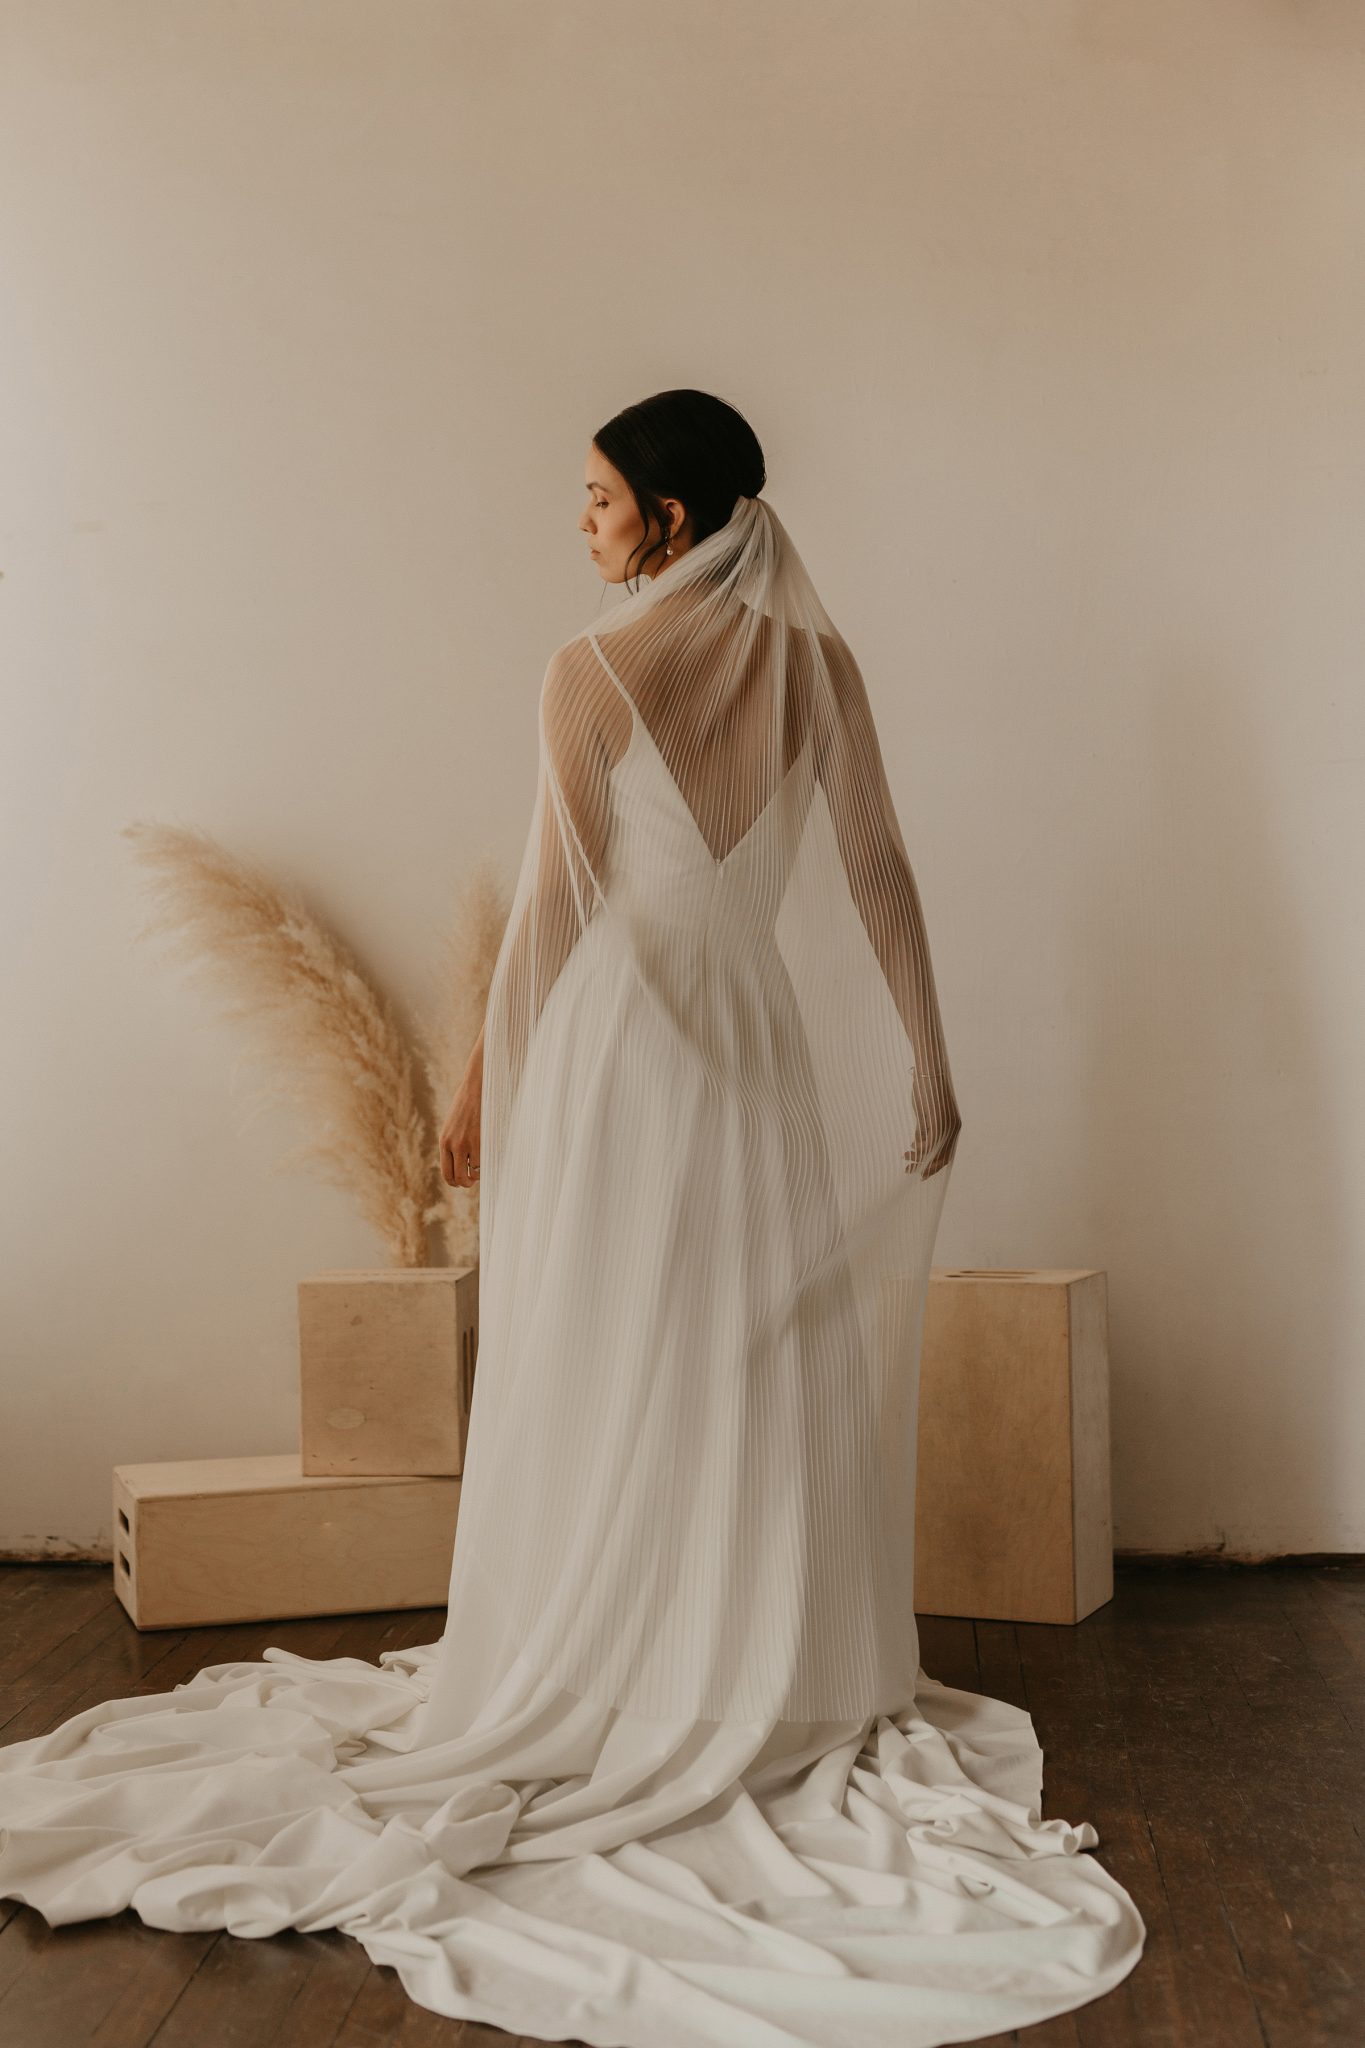 Bridal Minimalism Feature on Bronte Bride: Delica Bridal Shares All About New Bridal Trends & Dress Shopping During Covid, wedding dress shopping, boho bridal, bridal veil